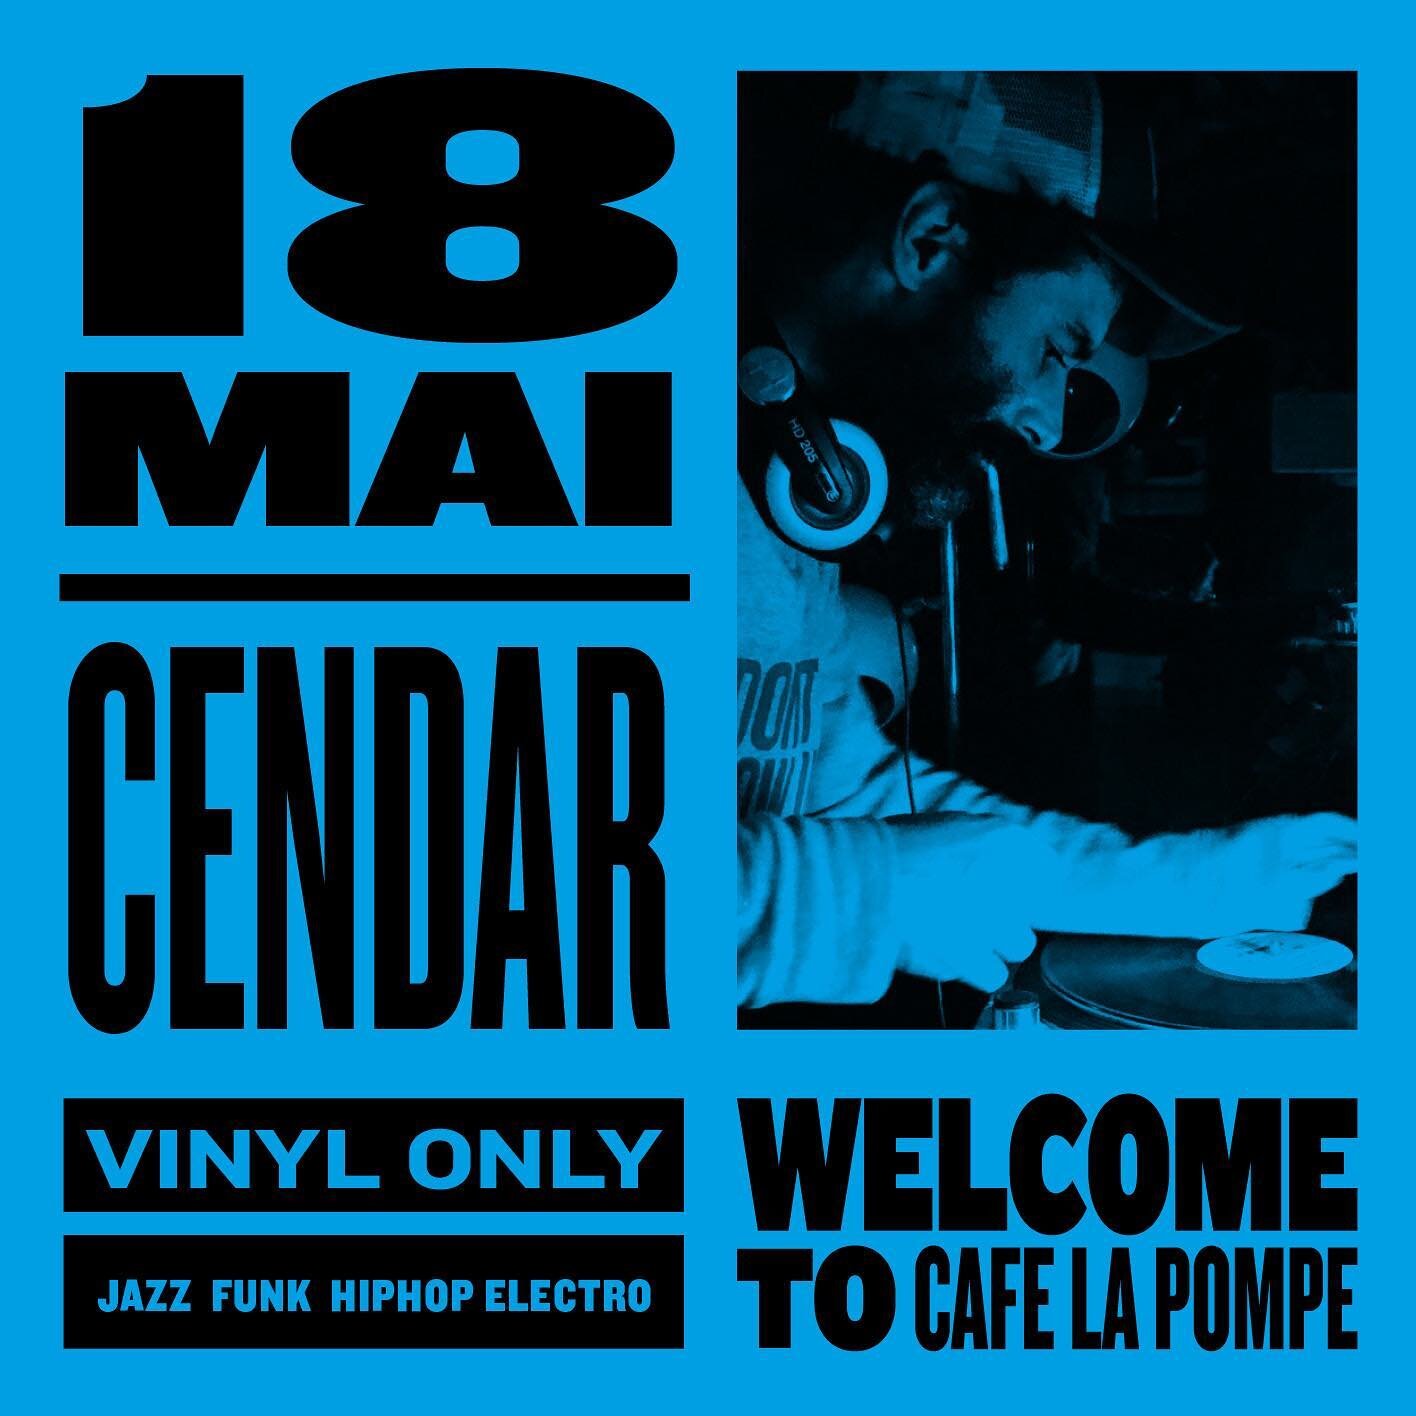 18 MAI 20h

WELCOME TO 
cafe la pompe

THIRD THURSDAY OF MAY

WITH CENDAR from @espace_d.i 
JAZZ FUNK HIPHOP ELECTRO

THE CONCEPT IS A ONLY VINYL SET.
WHICH START WITH A JAZZ &amp; HIPHOP VIBE TO MOVE IN FUNK / HOUSE / BRAZILIAN,&hellip; ACCORDING TO